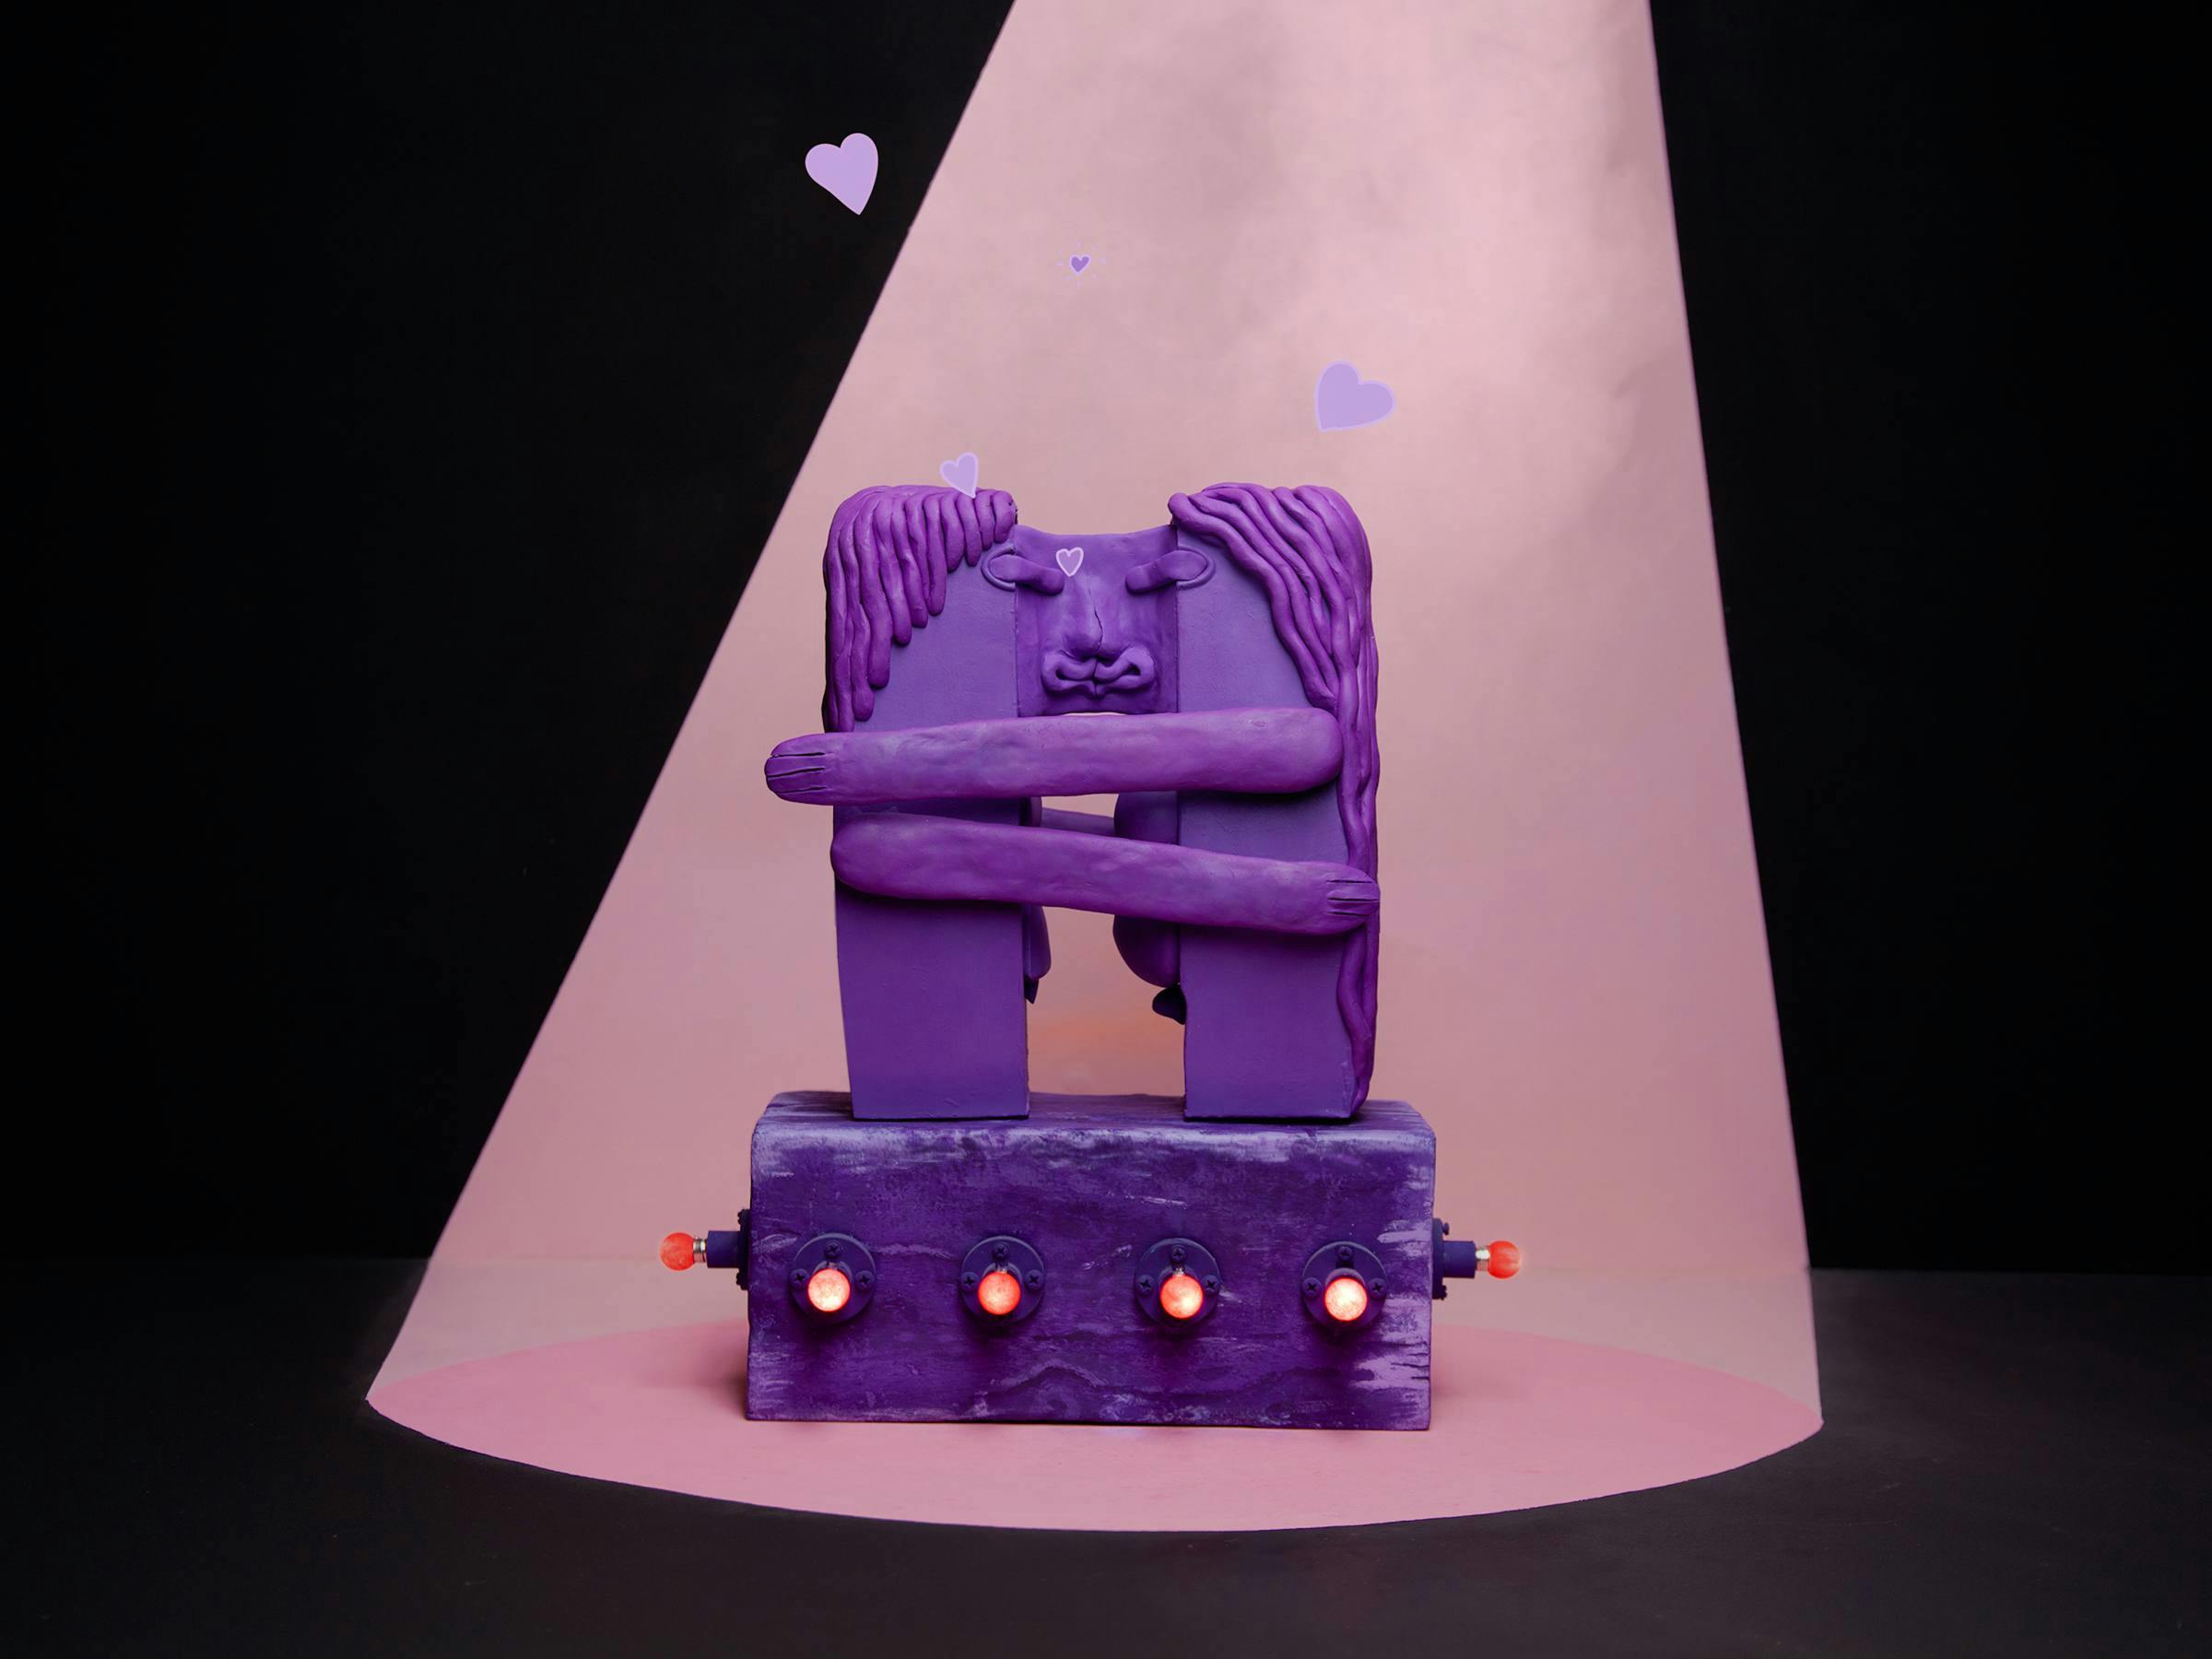 two purple plasticine figures embrace and kiss in a pink spotlight. They are standing on a purple has that has red light bulbs around it 2 purple hearts float above them.